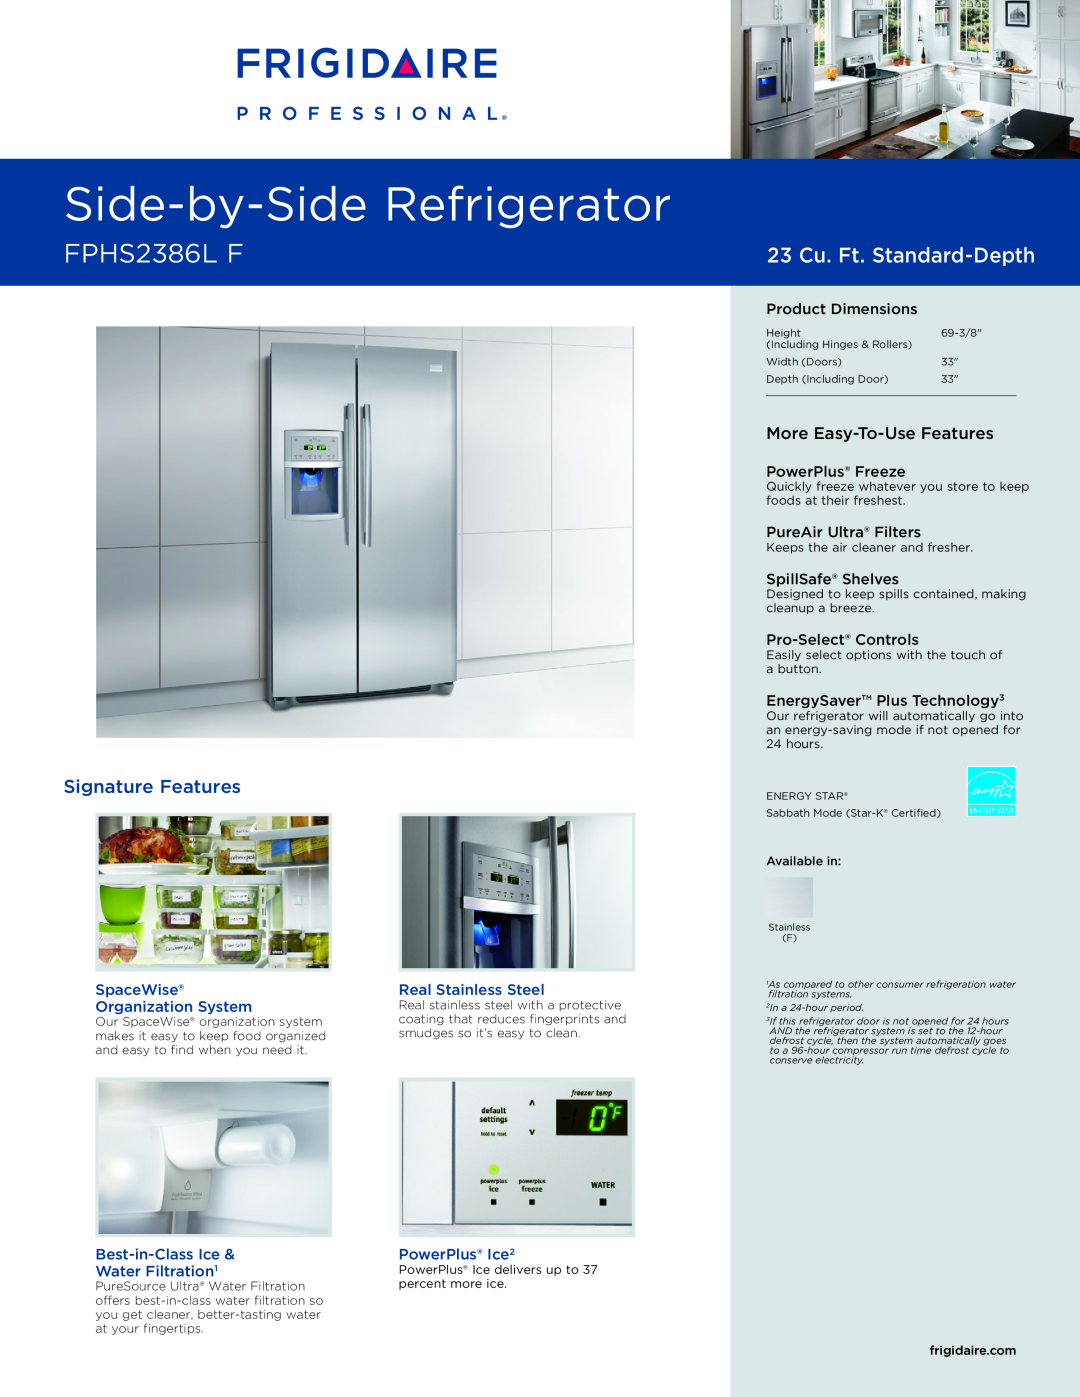 Frigidaire FPHS2386L F dimensions Side-by-SideRefrigerator, 23 Cu. Ft. Standard-Depth, Signature Features, SpaceWise 